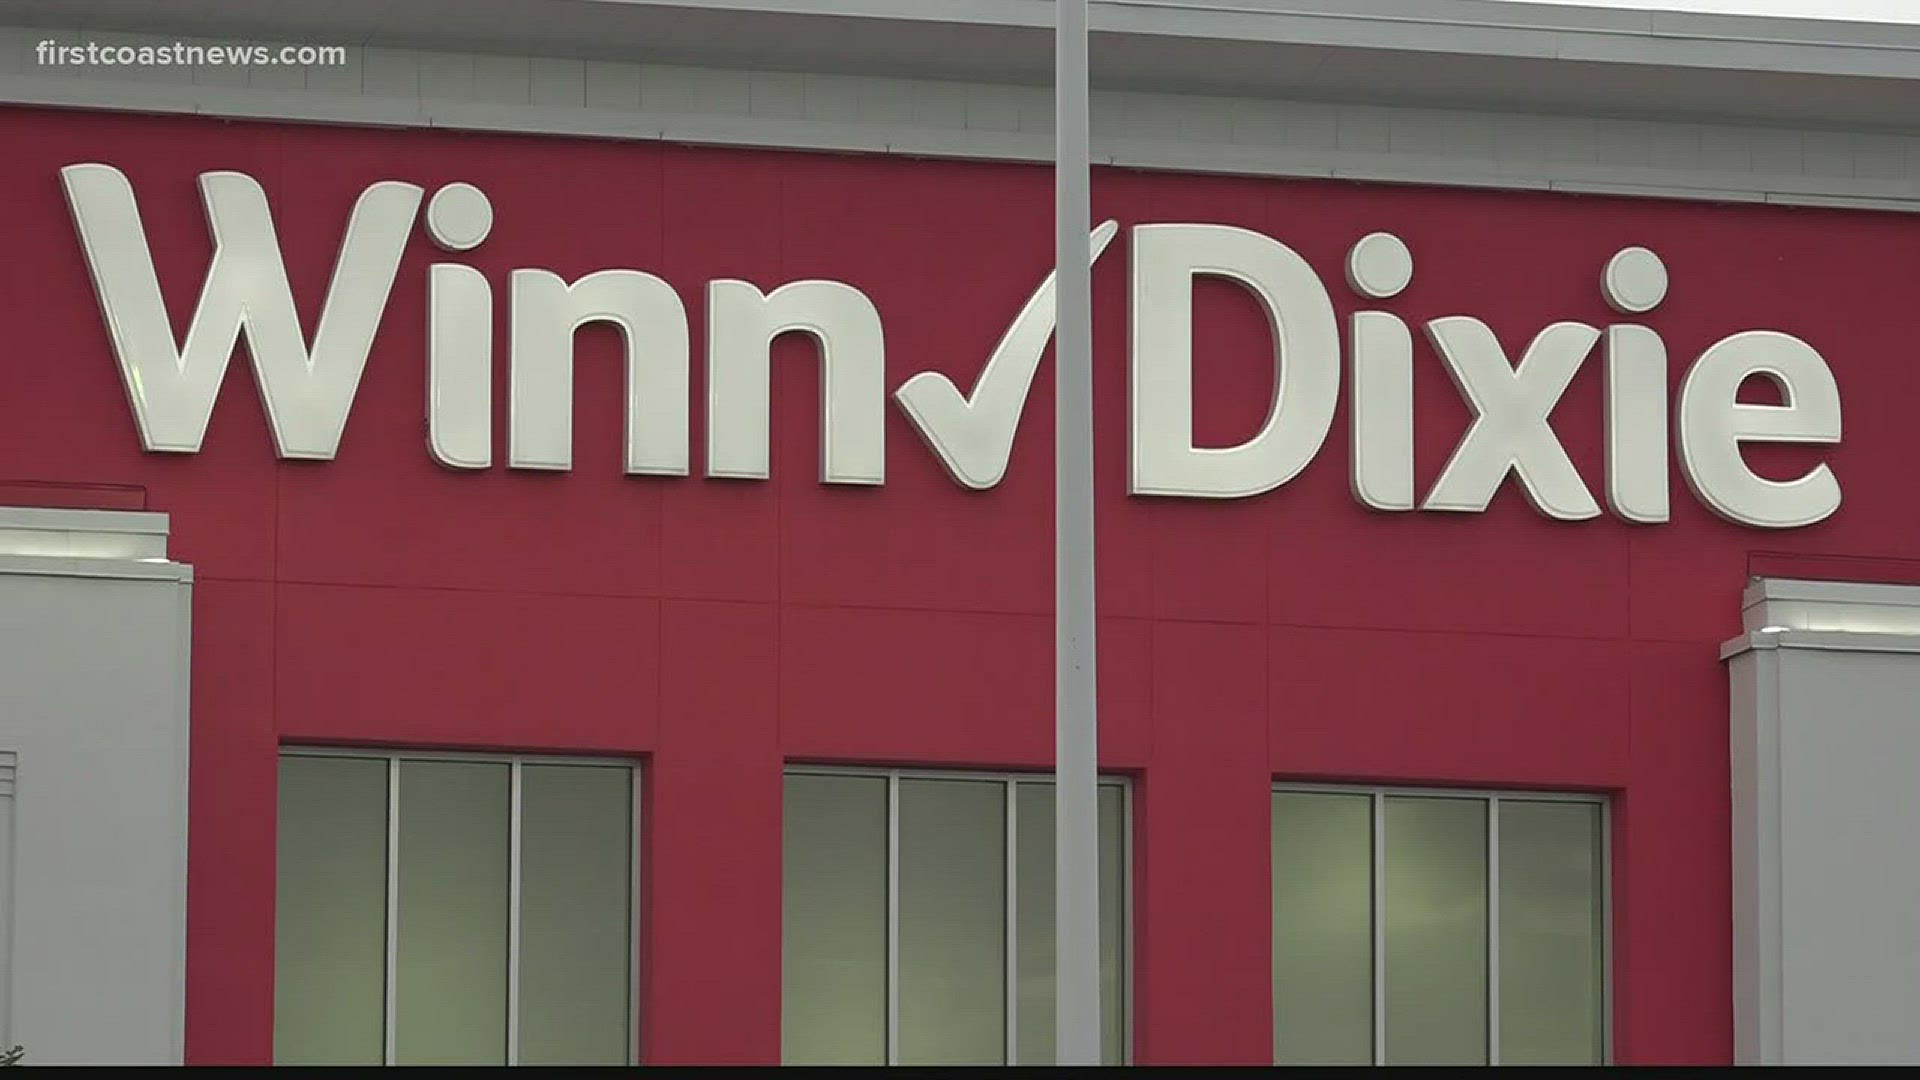 Winn-Dixie may be filing for bankruptcy, according to a report from Bloomberg.